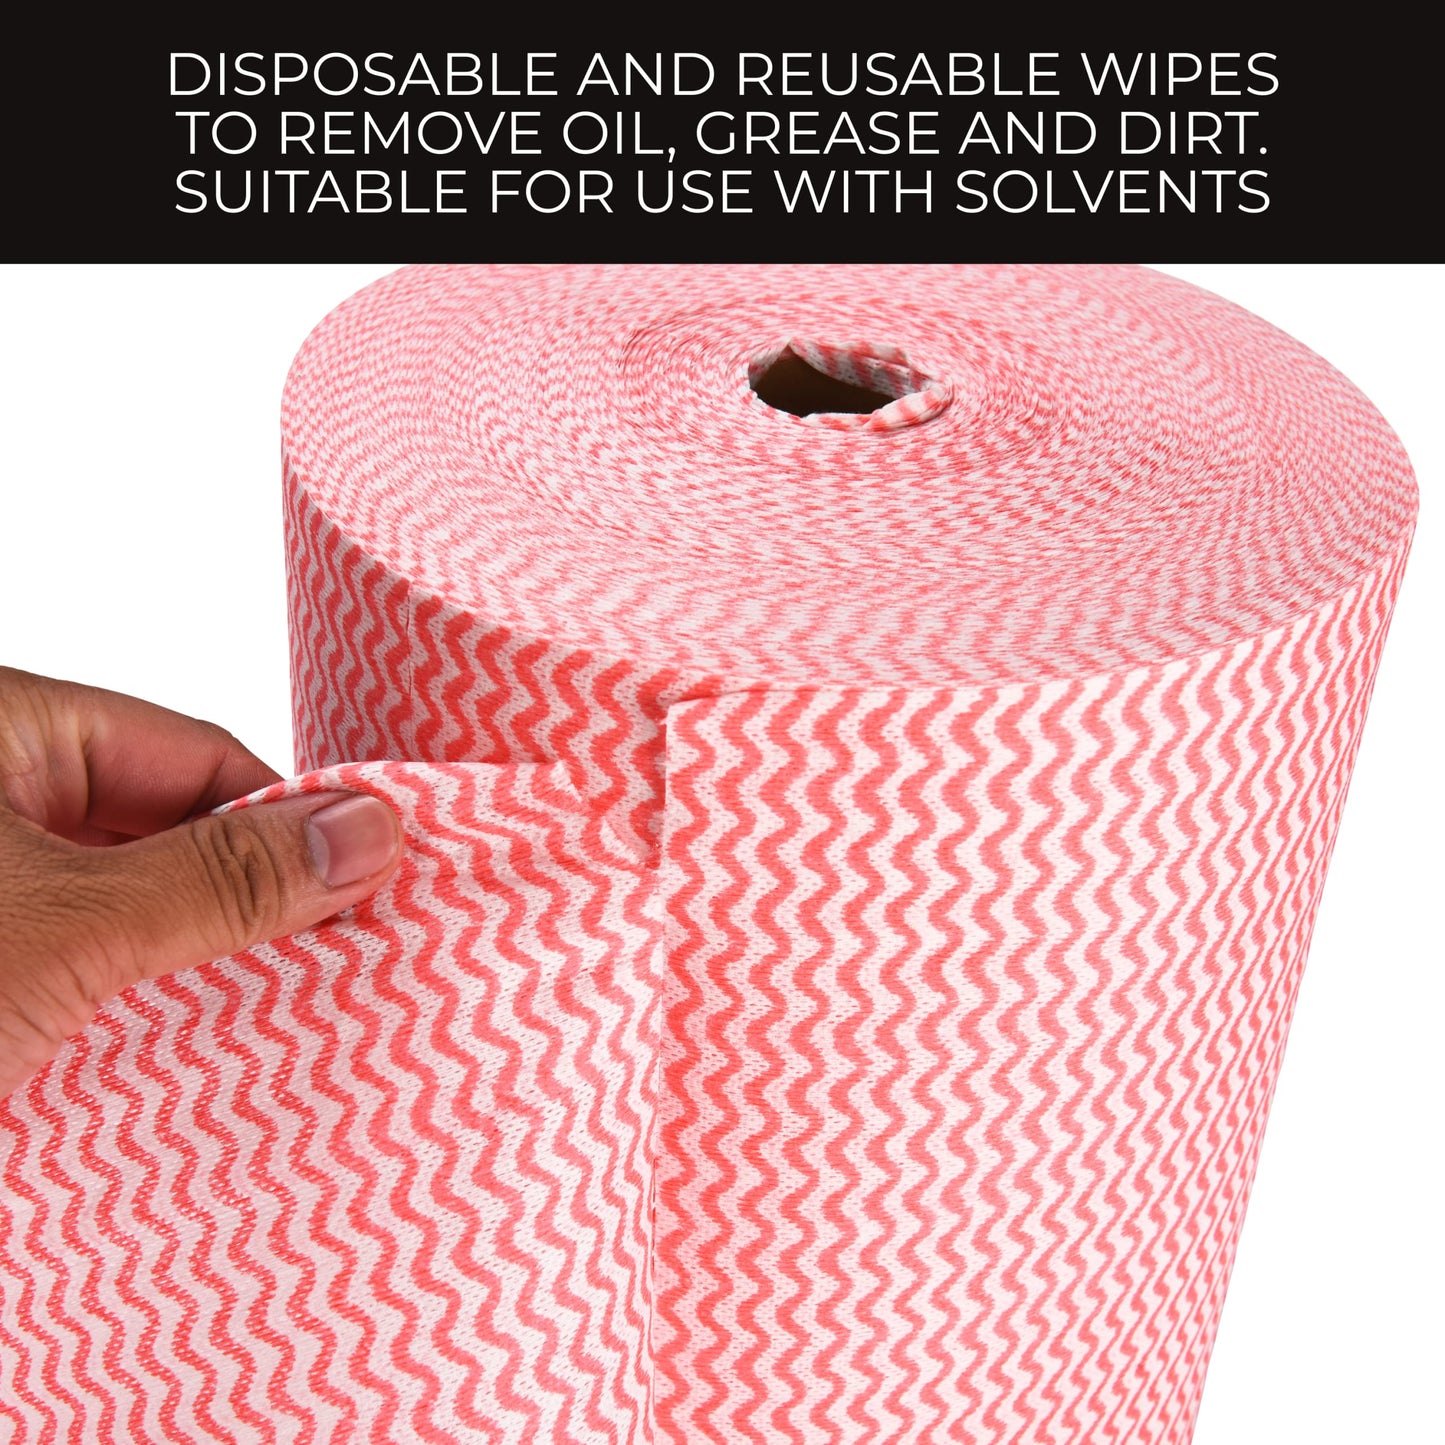 Bolt Dropper Reusable Microfiber Towel Roll (12"x10"-Inch) - Disposable Cleaning Cloth Wipes - Handy Wipes for Shop, Kitchen, Office - Jumbo Roll of